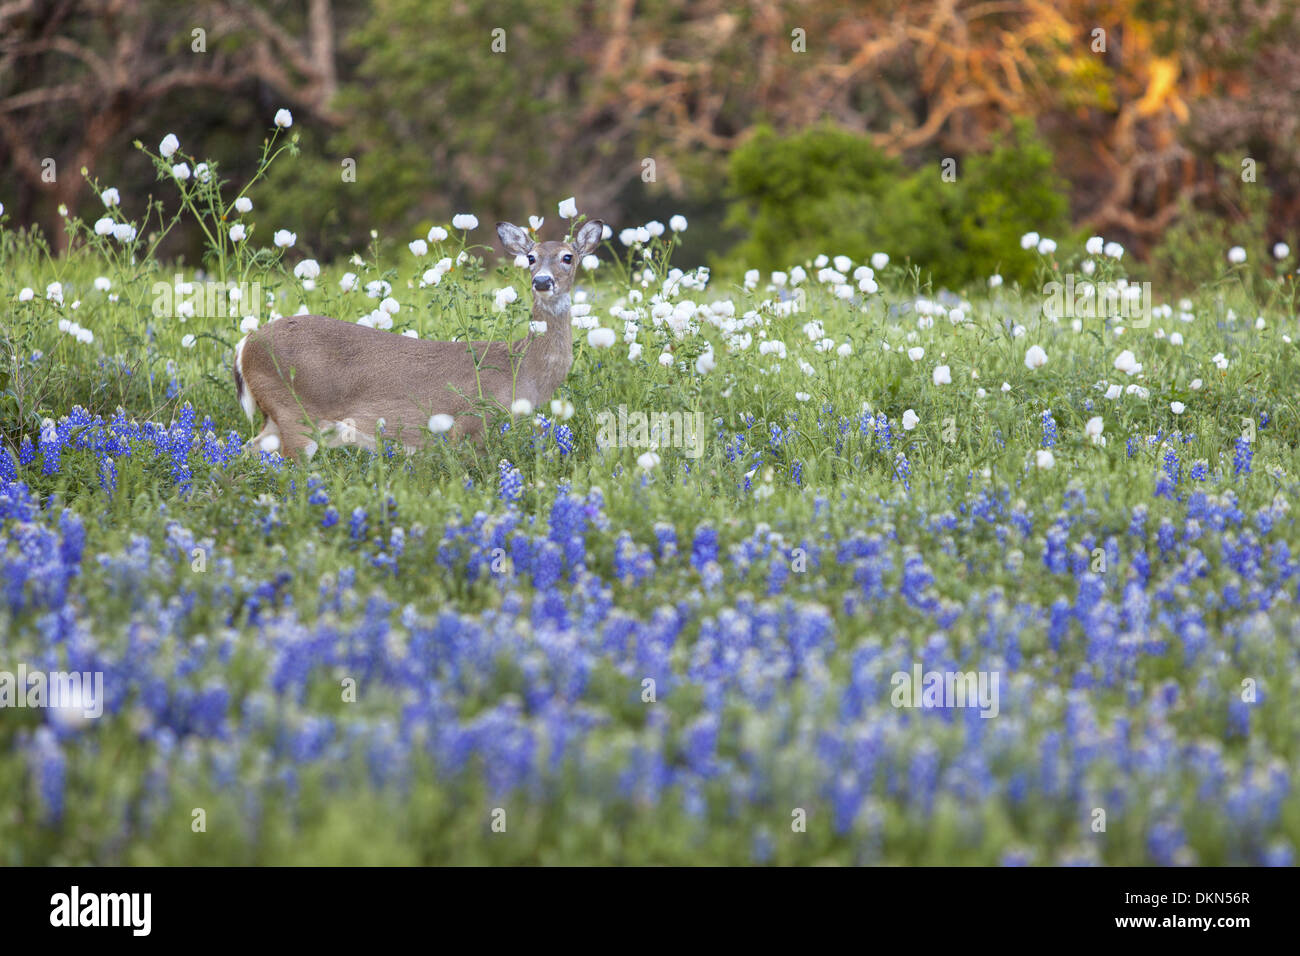 In the Texas Hill Country, a deer plays in a field of bluebonnets. These Texas wildflowers are everywhere when the rains come. Stock Photo